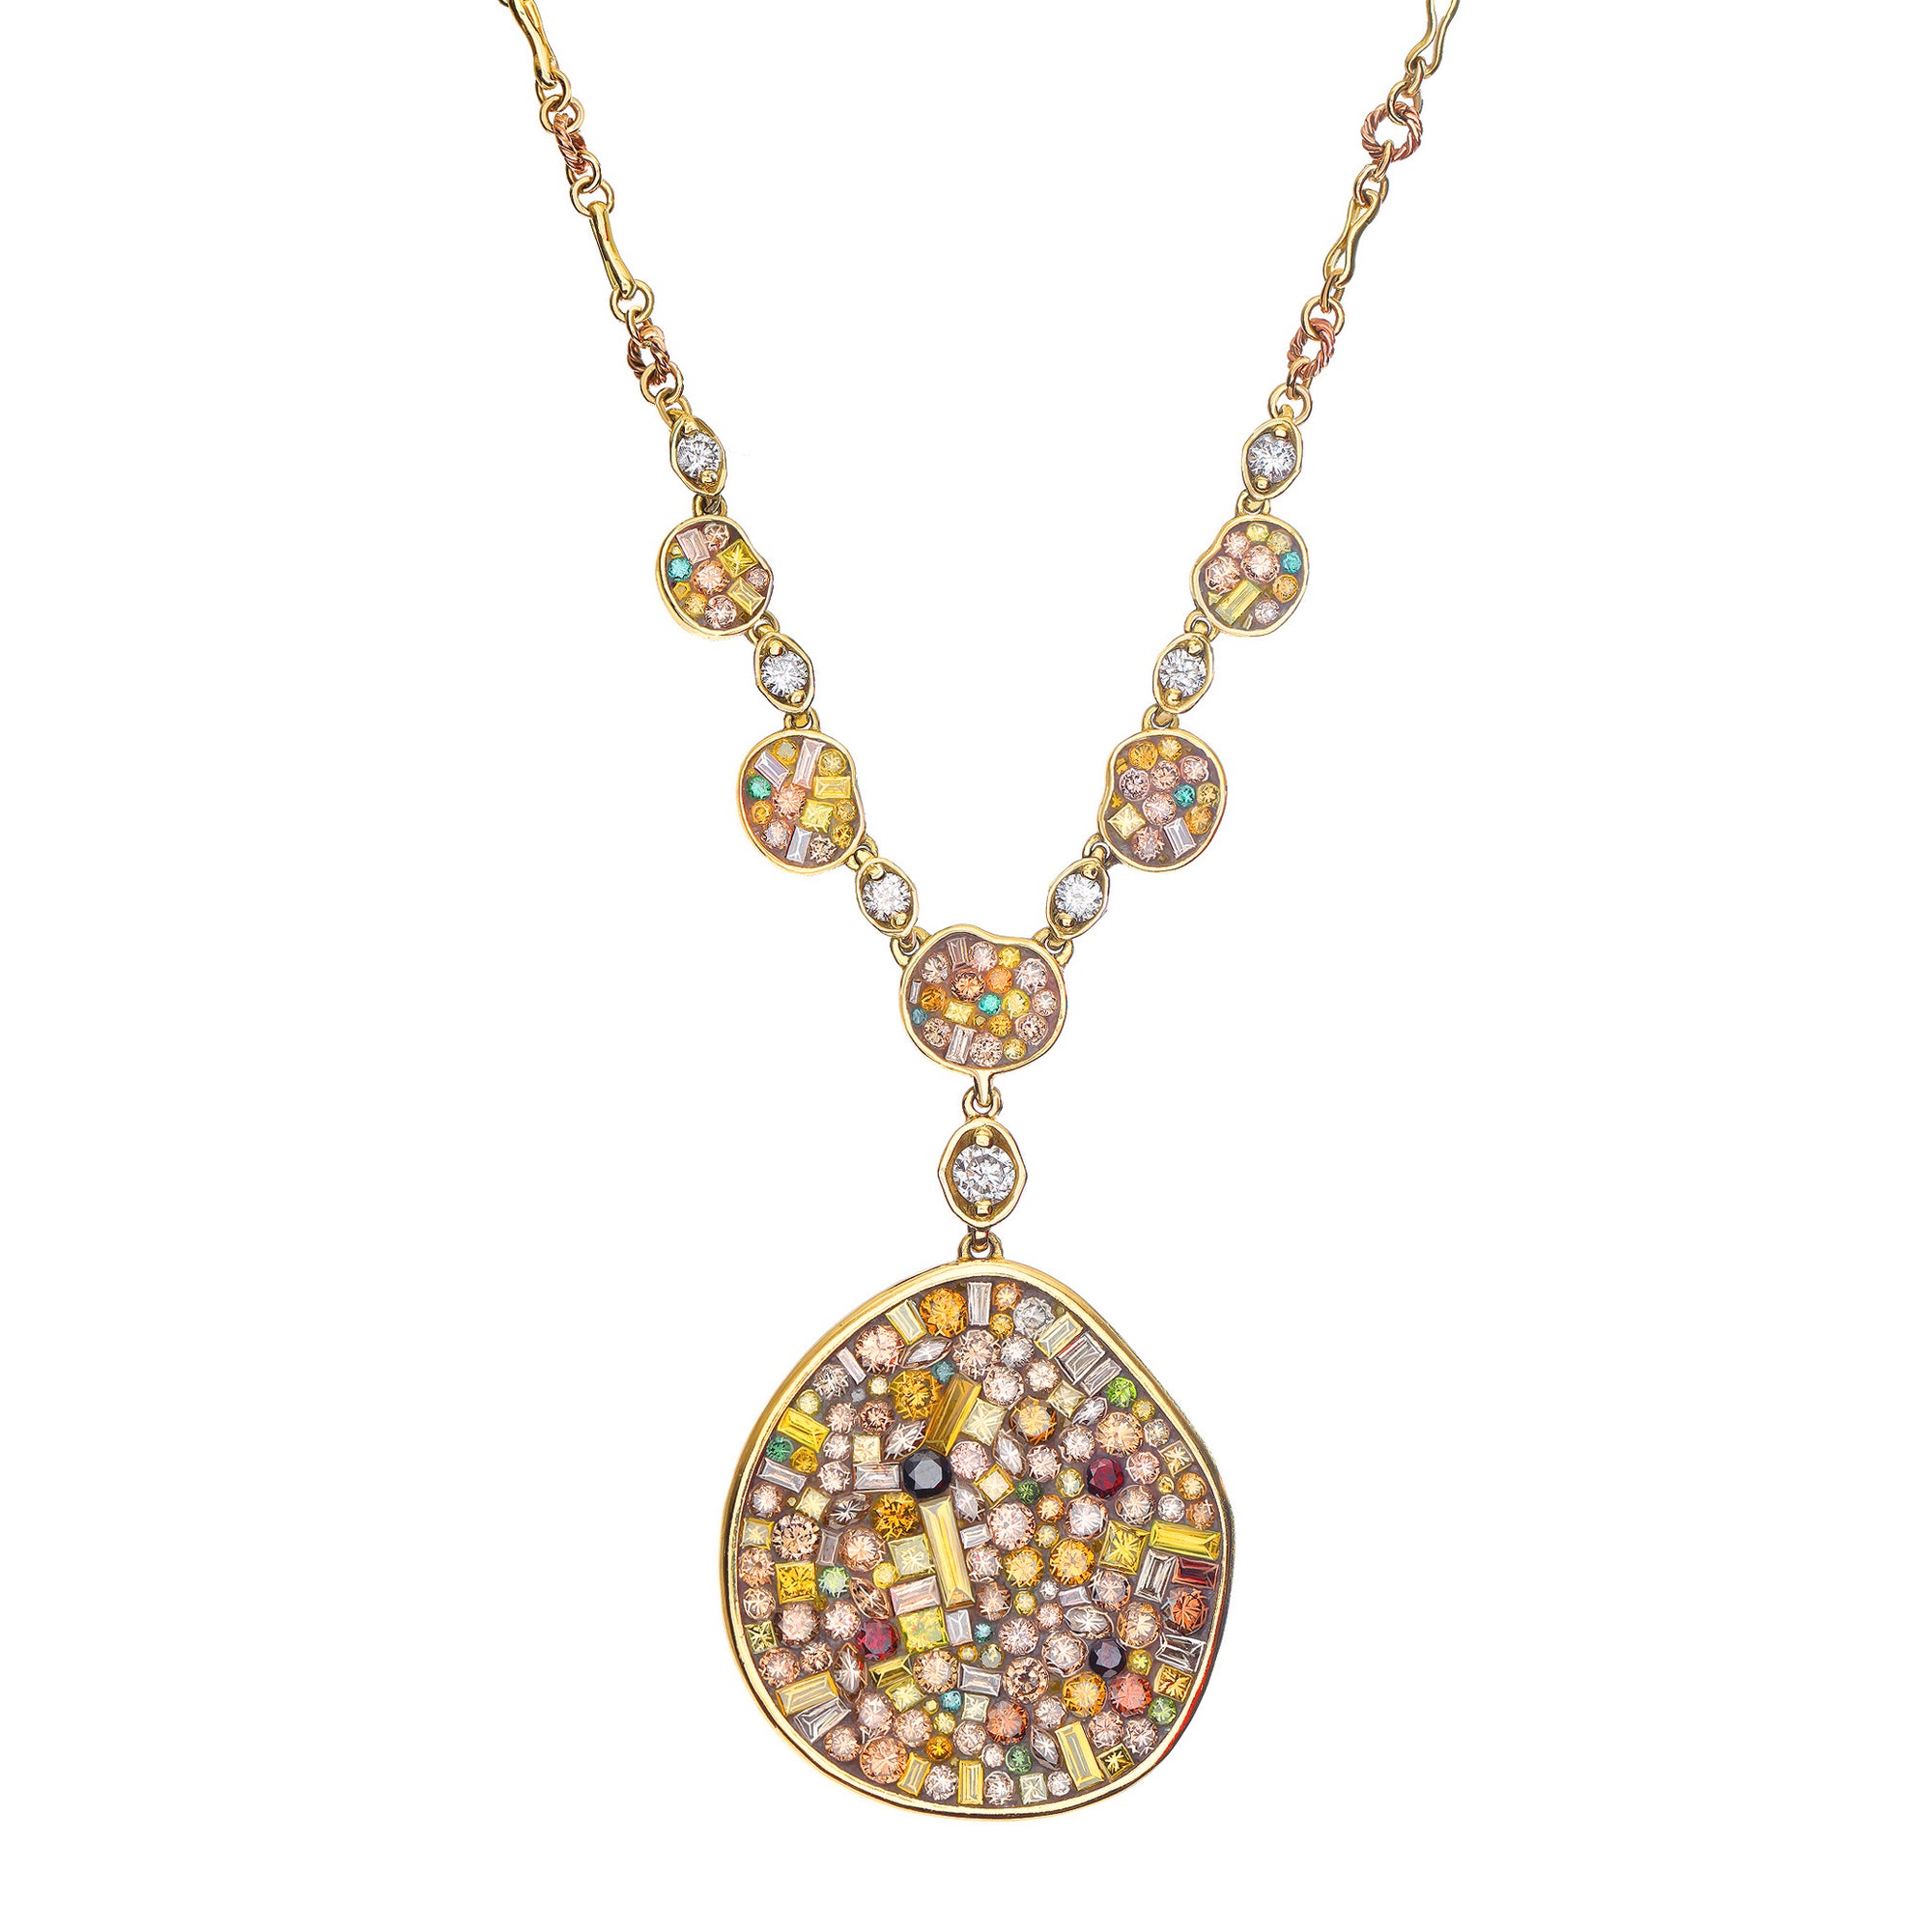 Cinnamon Pebble Drop Diamond Necklace by Pleve available at Talisman Collection Fine Jewelers in El Dorado Hills, CA and online. Specs: 18k yellow gold; color enhanced diamonds 7.15 cts